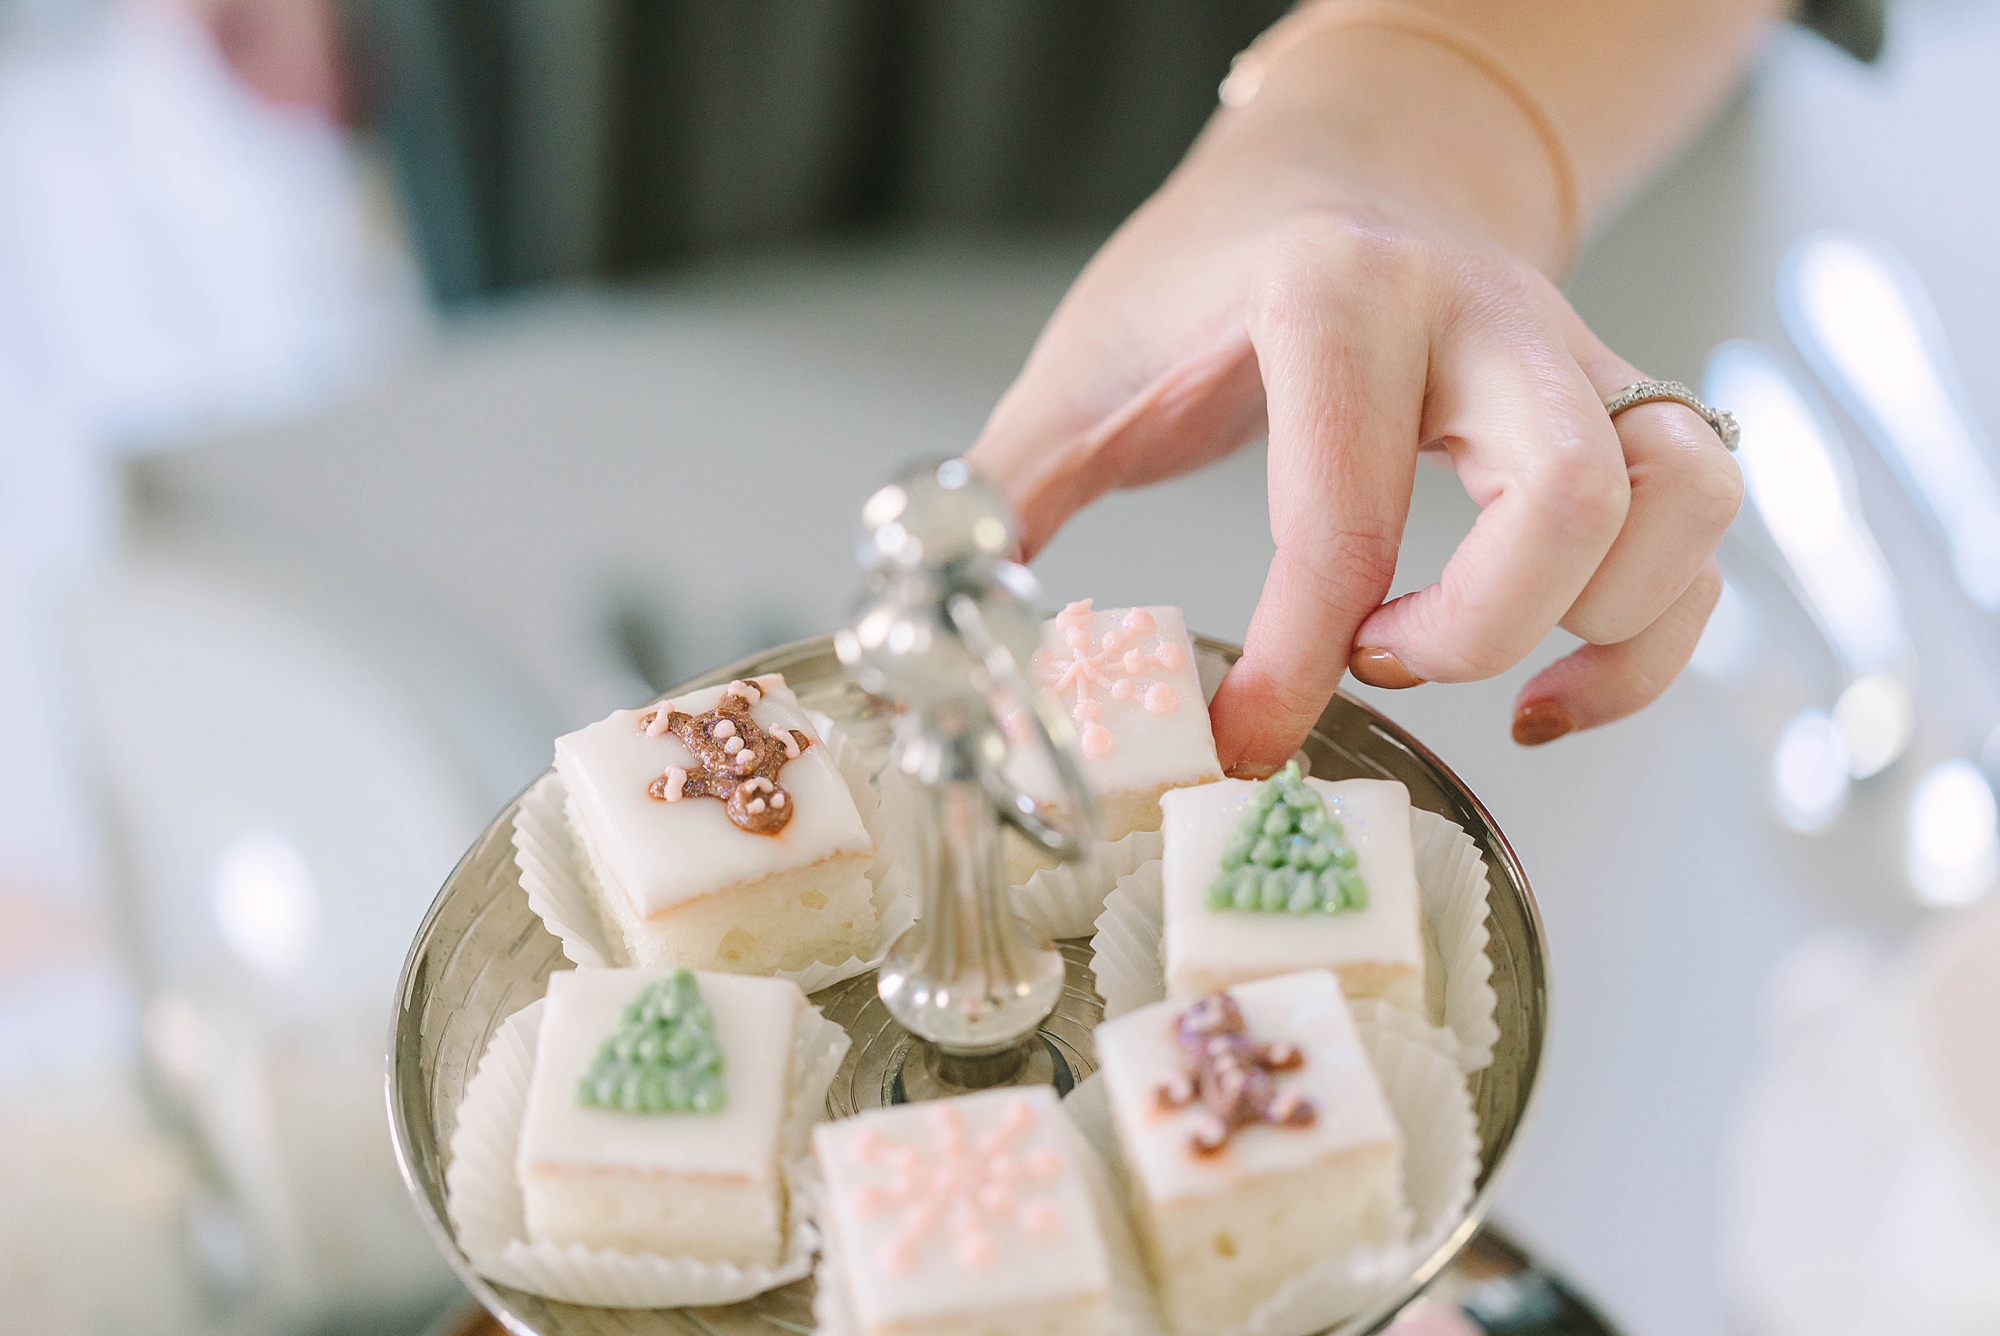 woman reaches for petite four at holiday tea setup